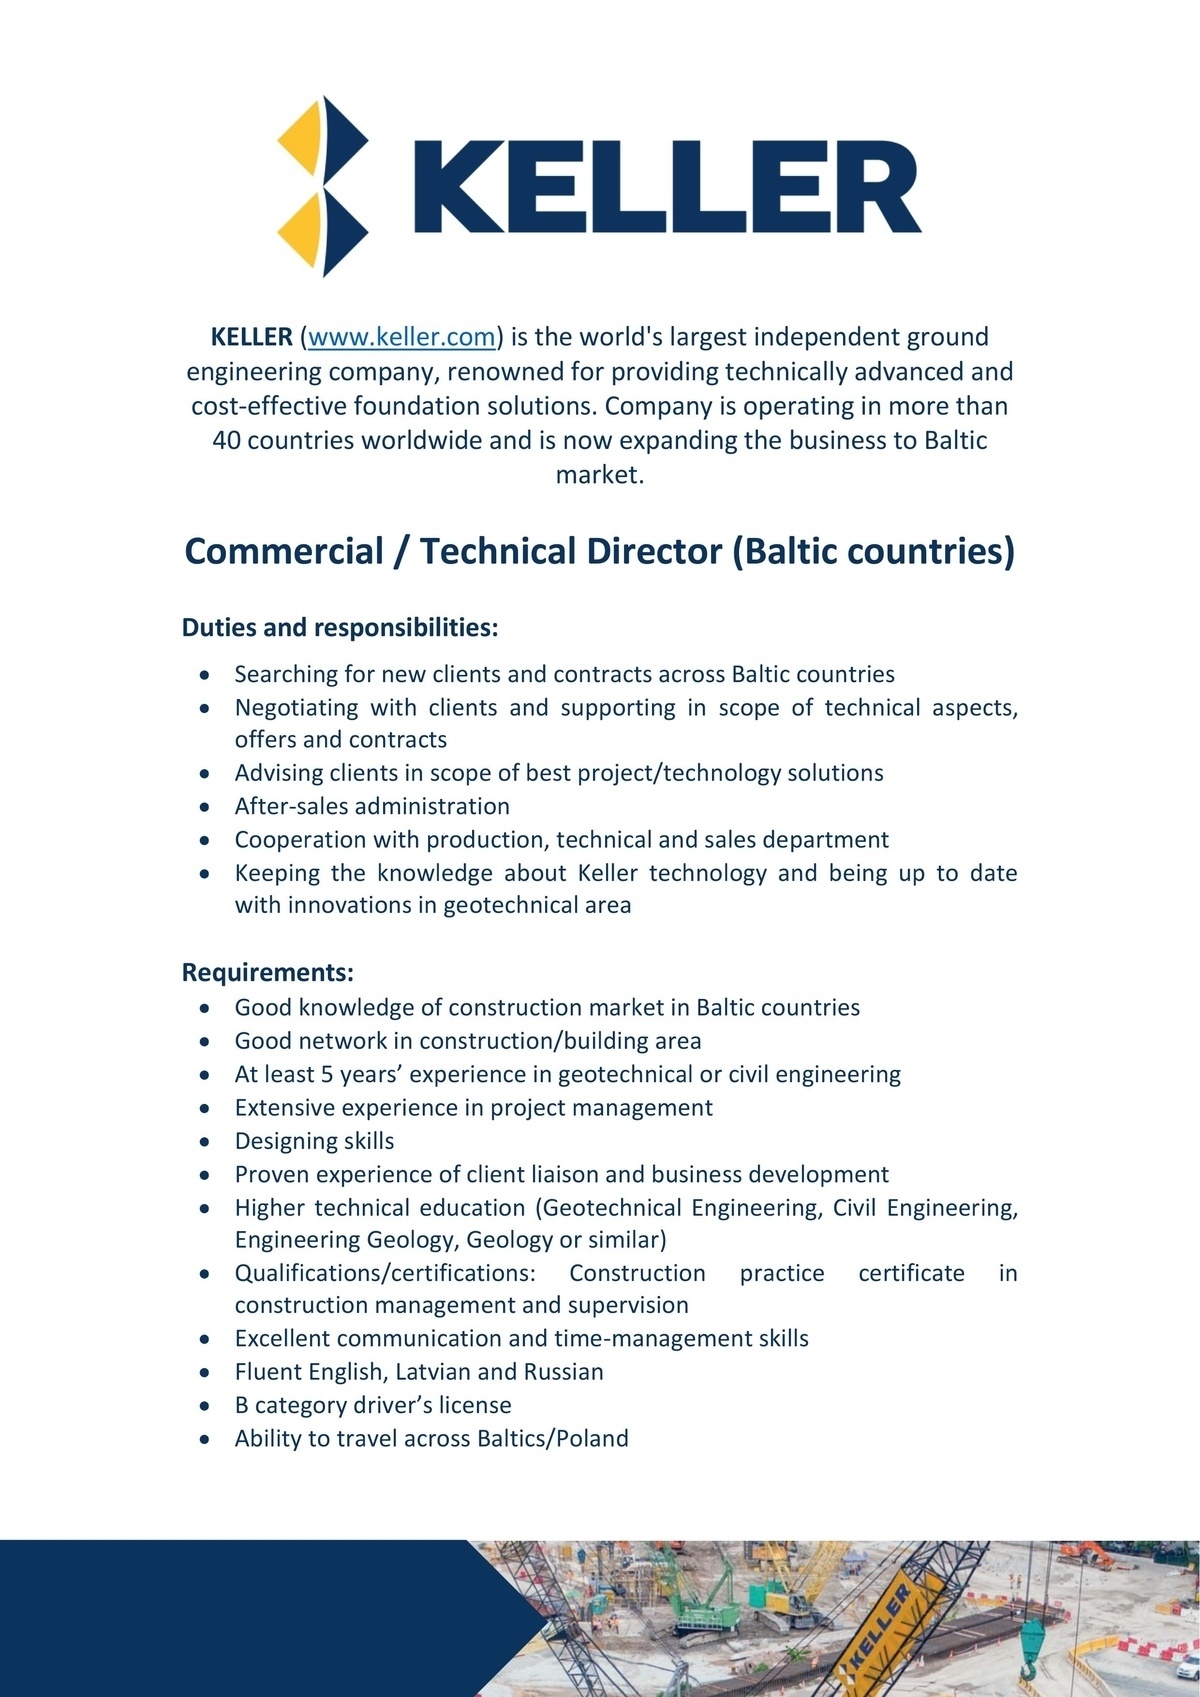 CV Market client Commercial / Technical Director (Baltic countries)